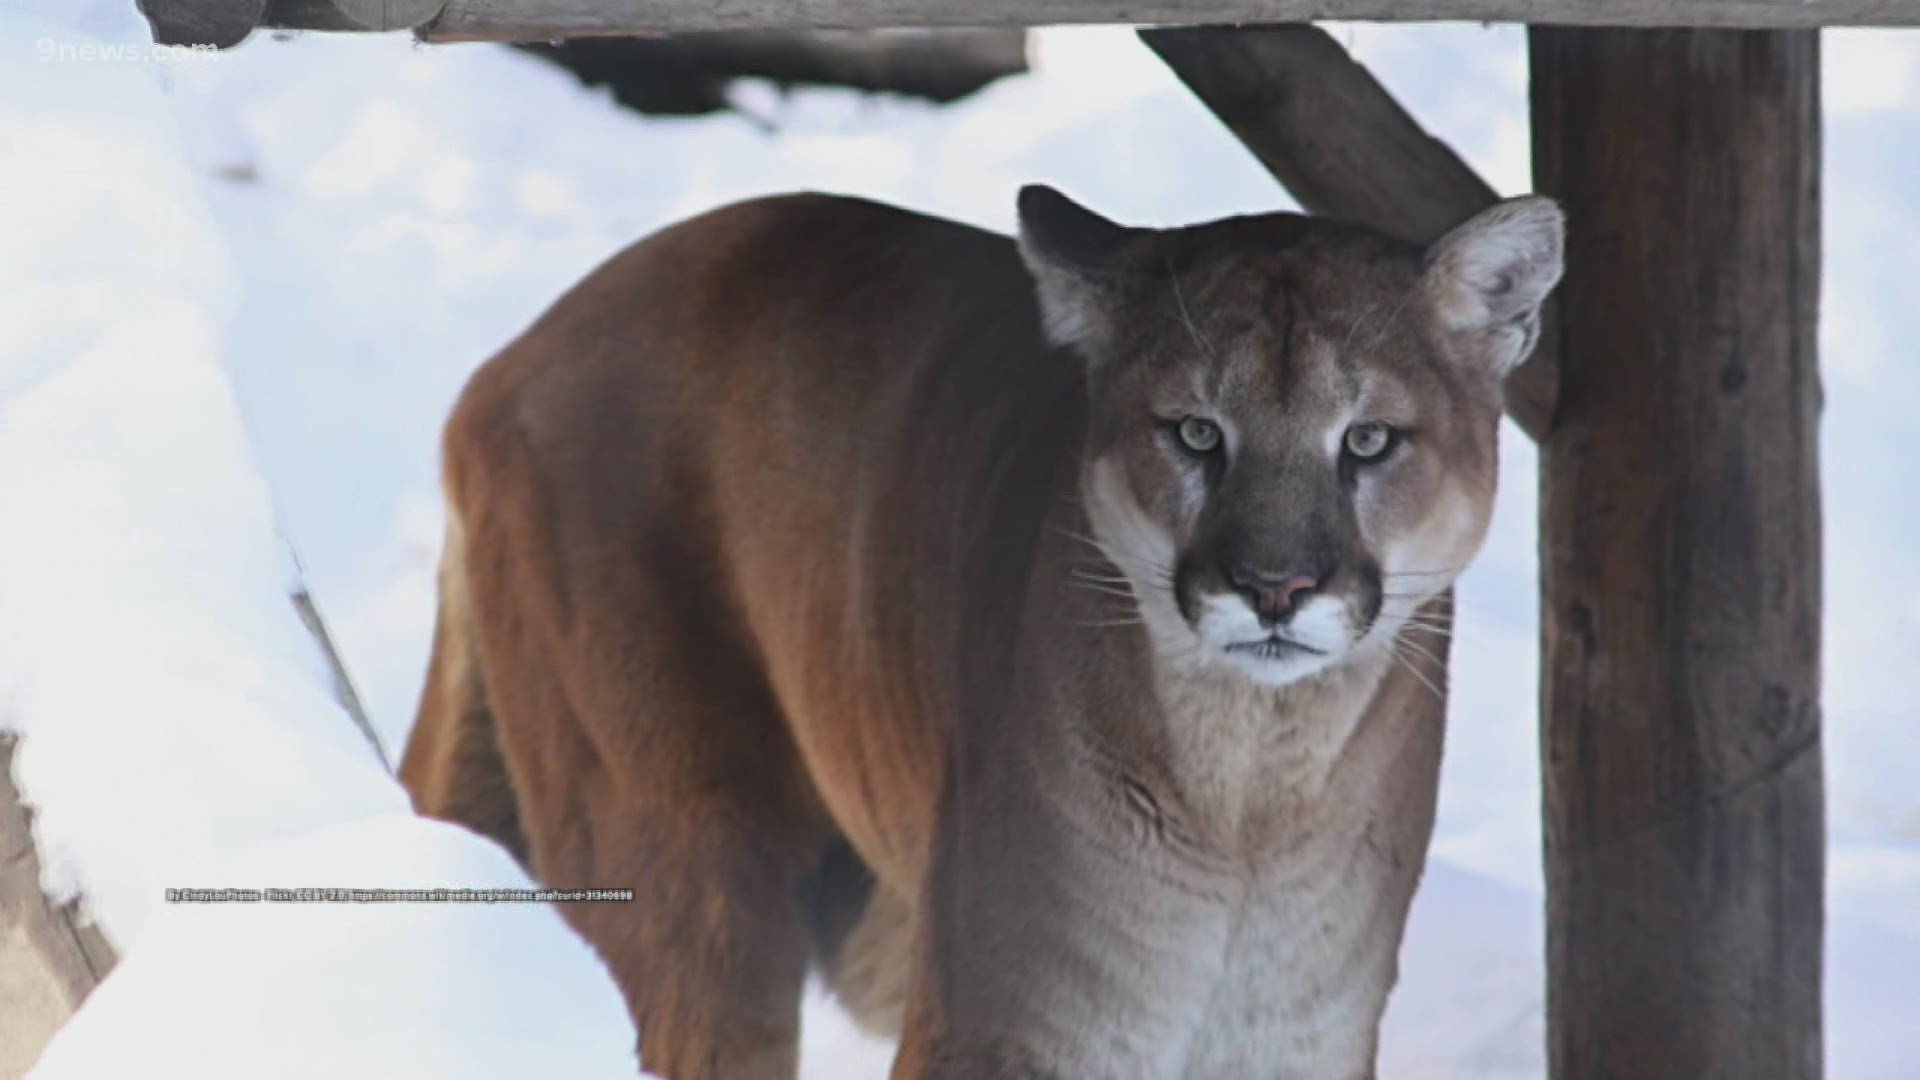 Colorado Parks and Wildlife said this is the state's first reported mountain lion attack since Feb. 27, 2022.